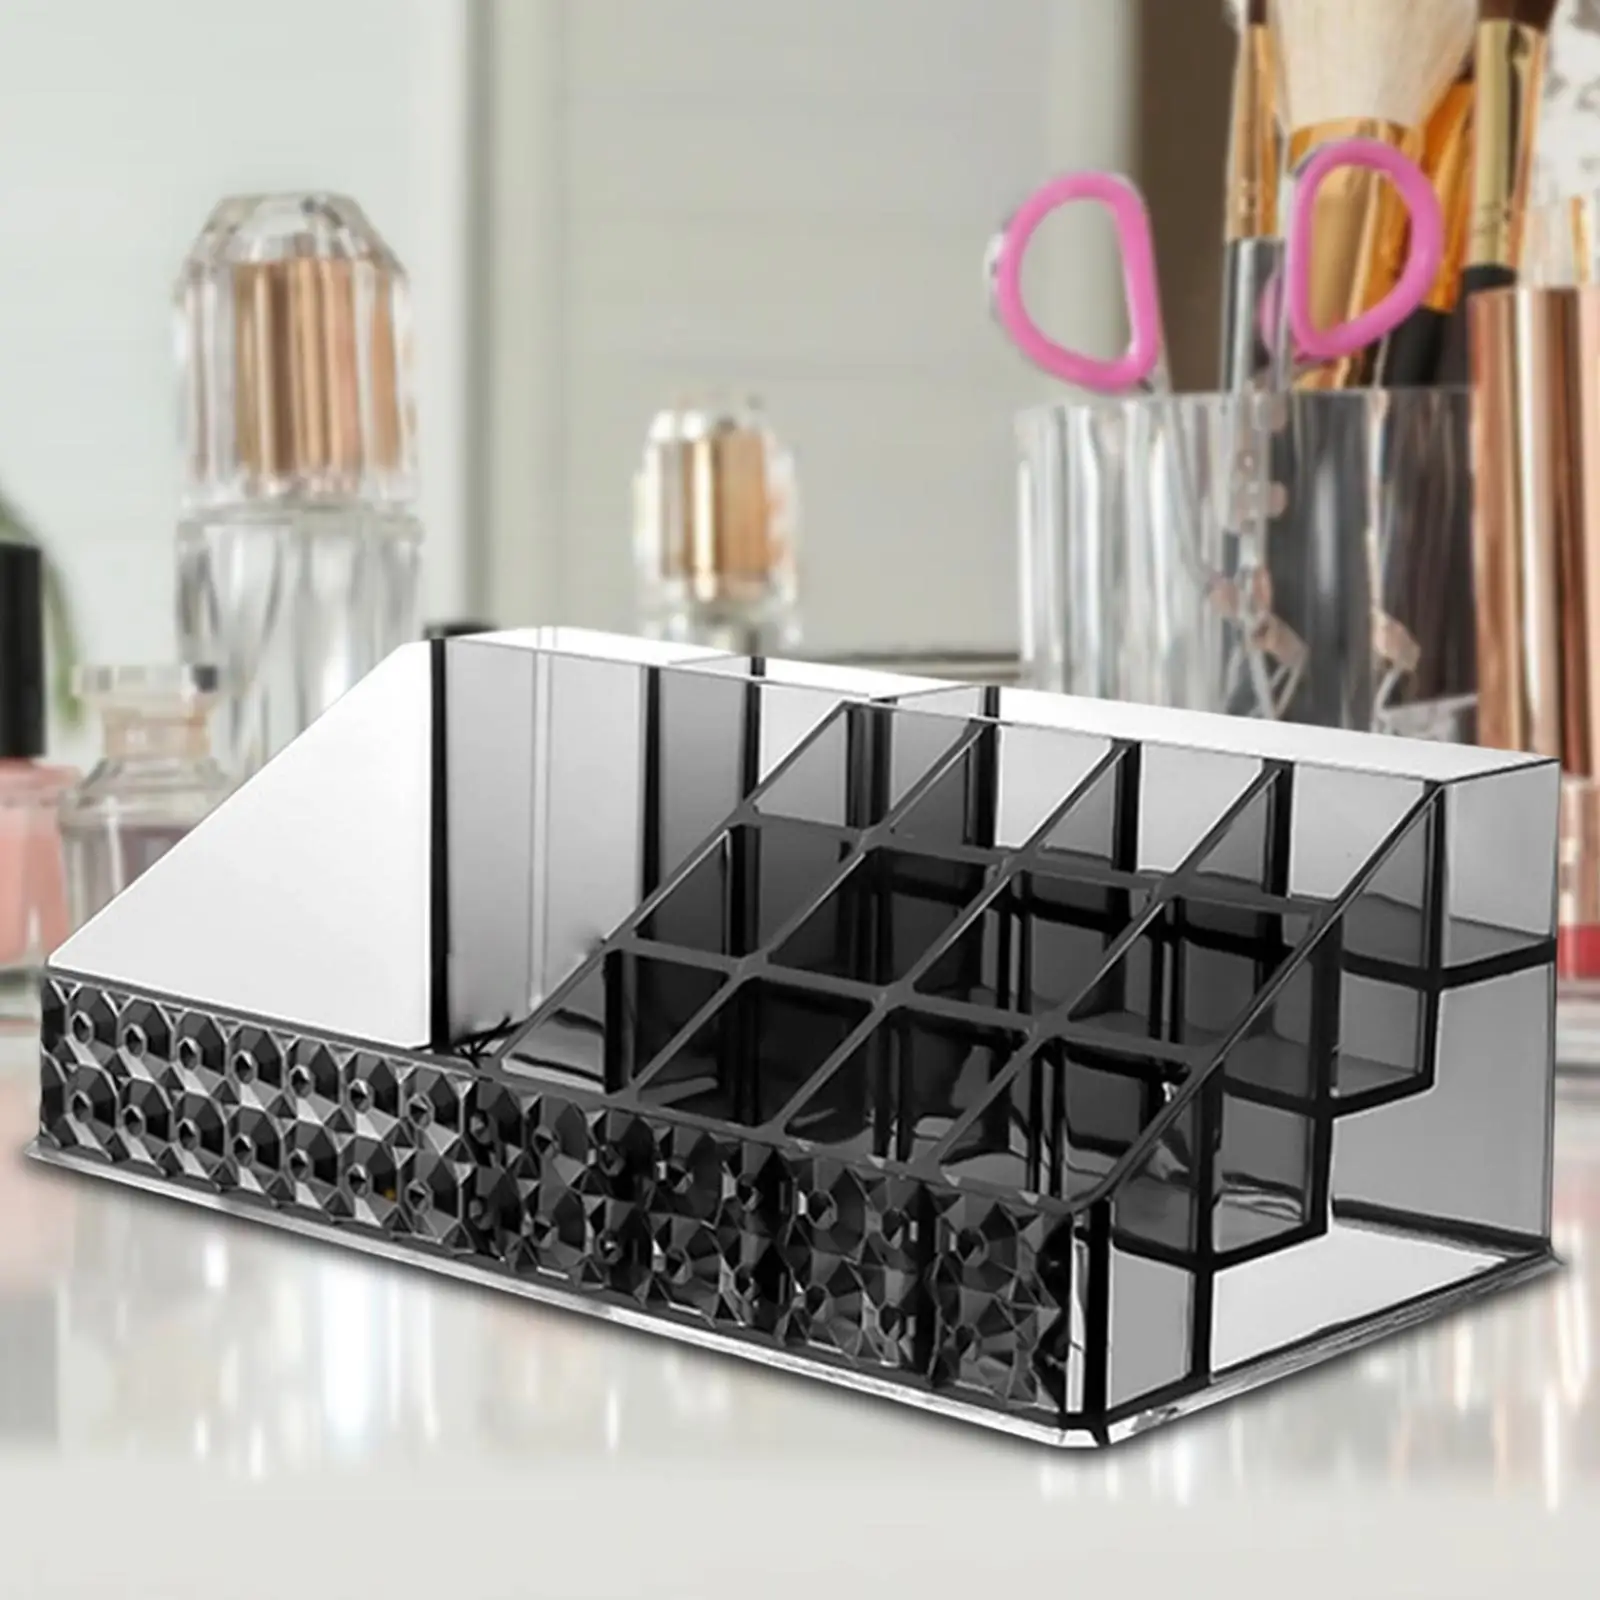 Makeup Desk Organizer Large Capacity Cosmetic Storage Box Container for Desktop